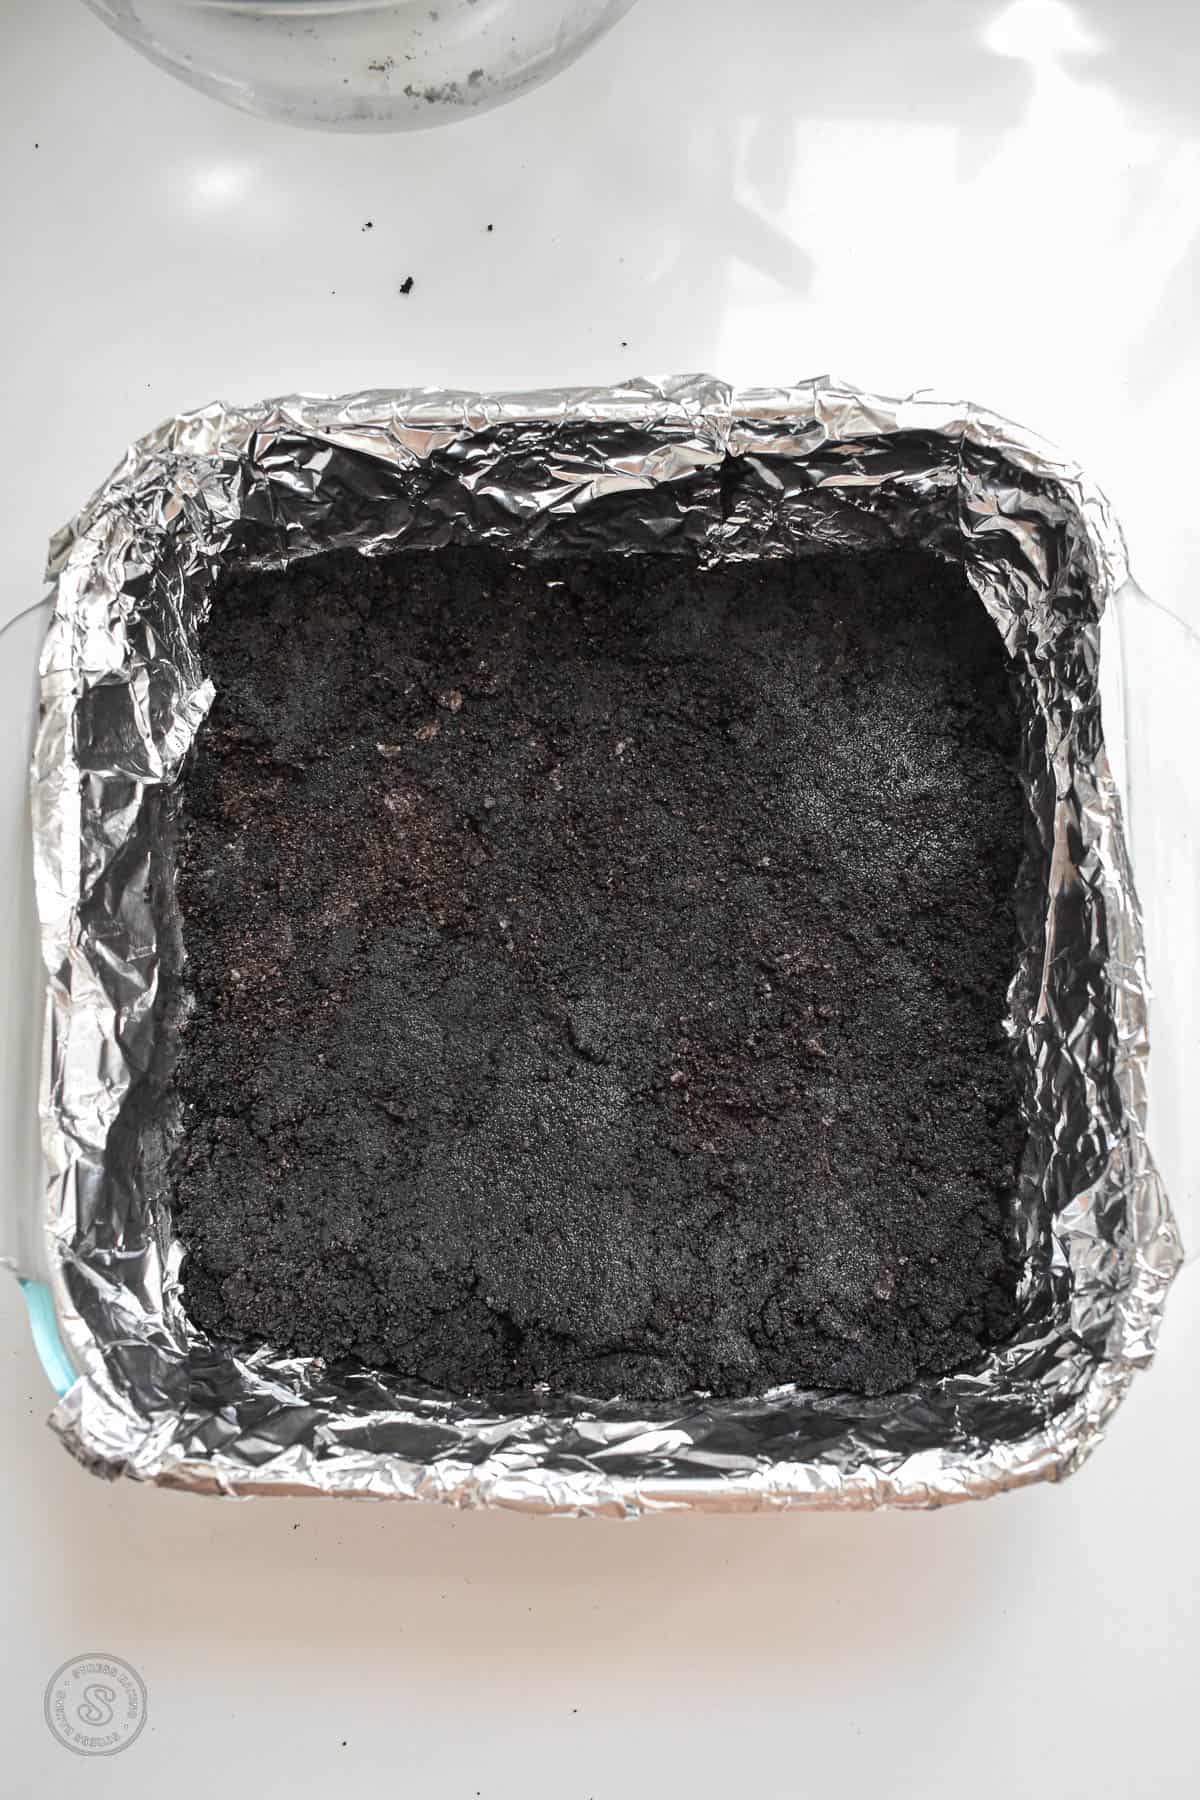 Oreo crust in a baking pan lined with foil